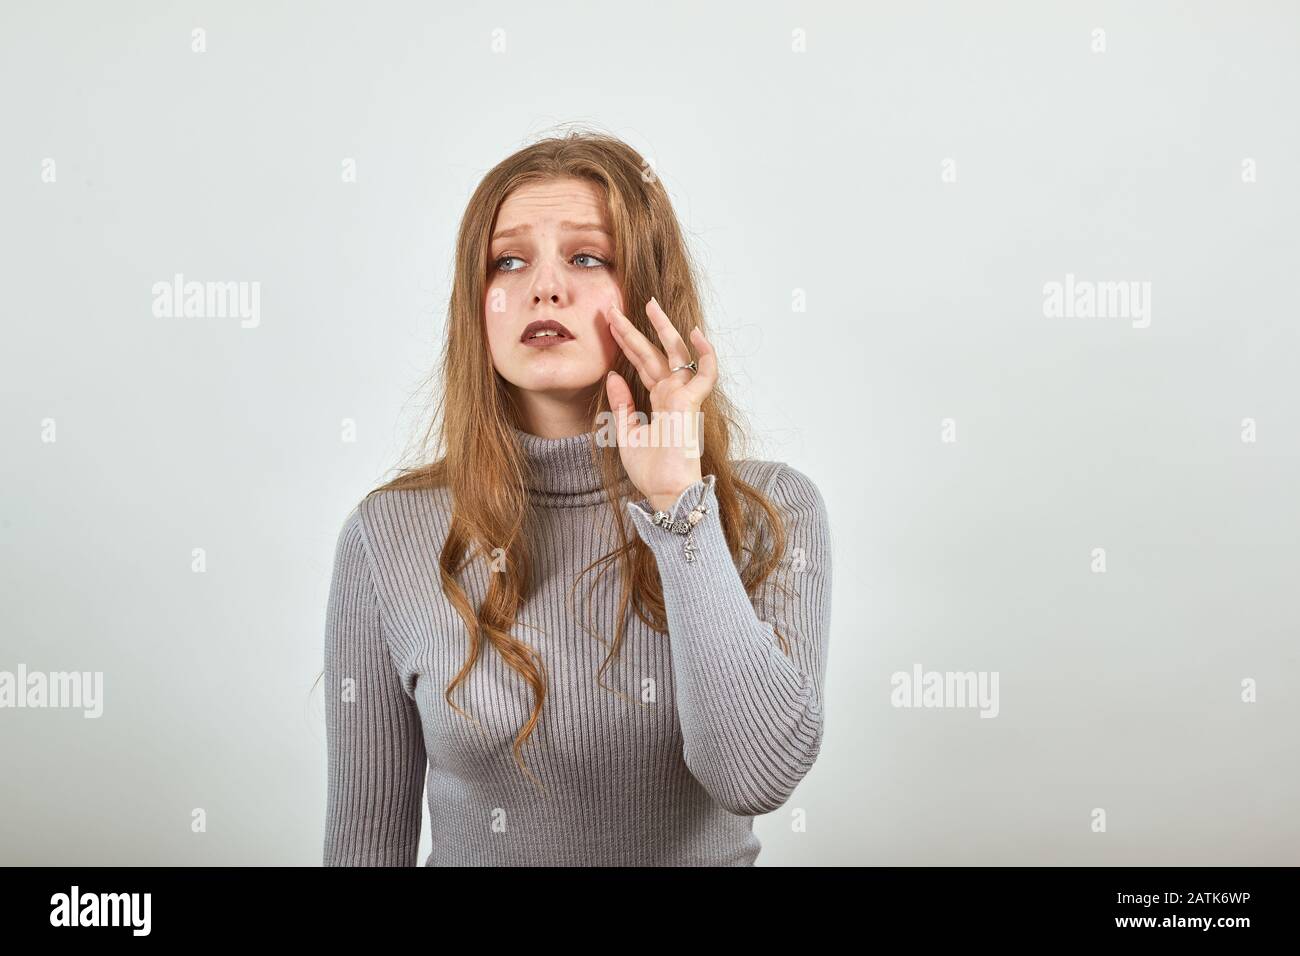 woman in gray sweater with sad look says goodbye waving her hand sadness in eyes Stock Photo